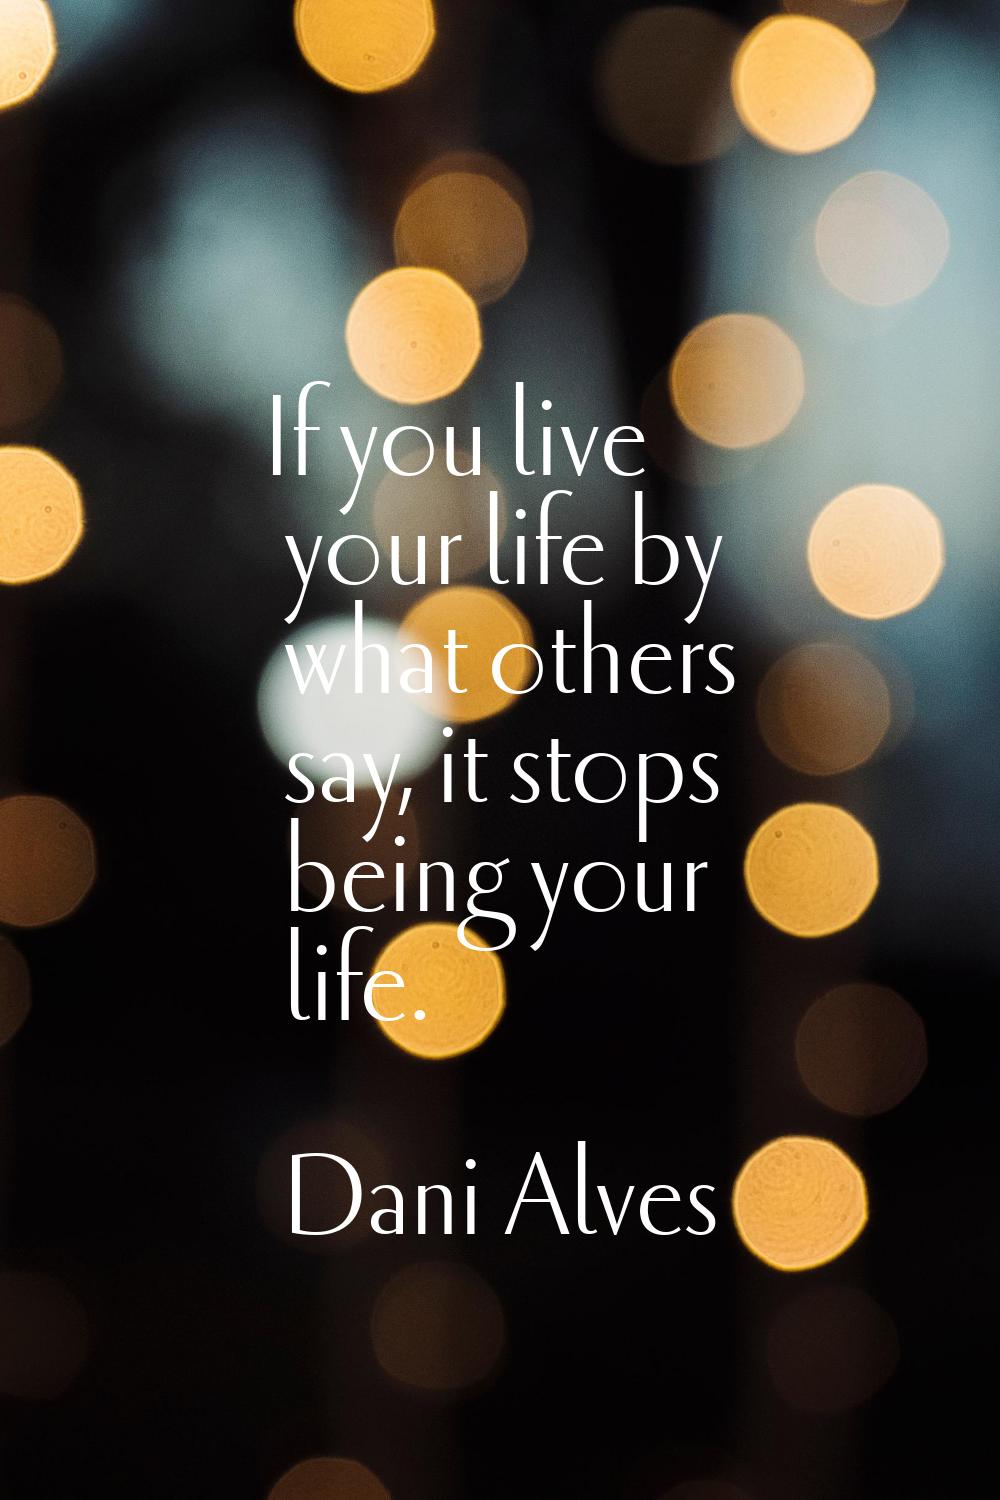 If you live your life by what others say, it stops being your life.